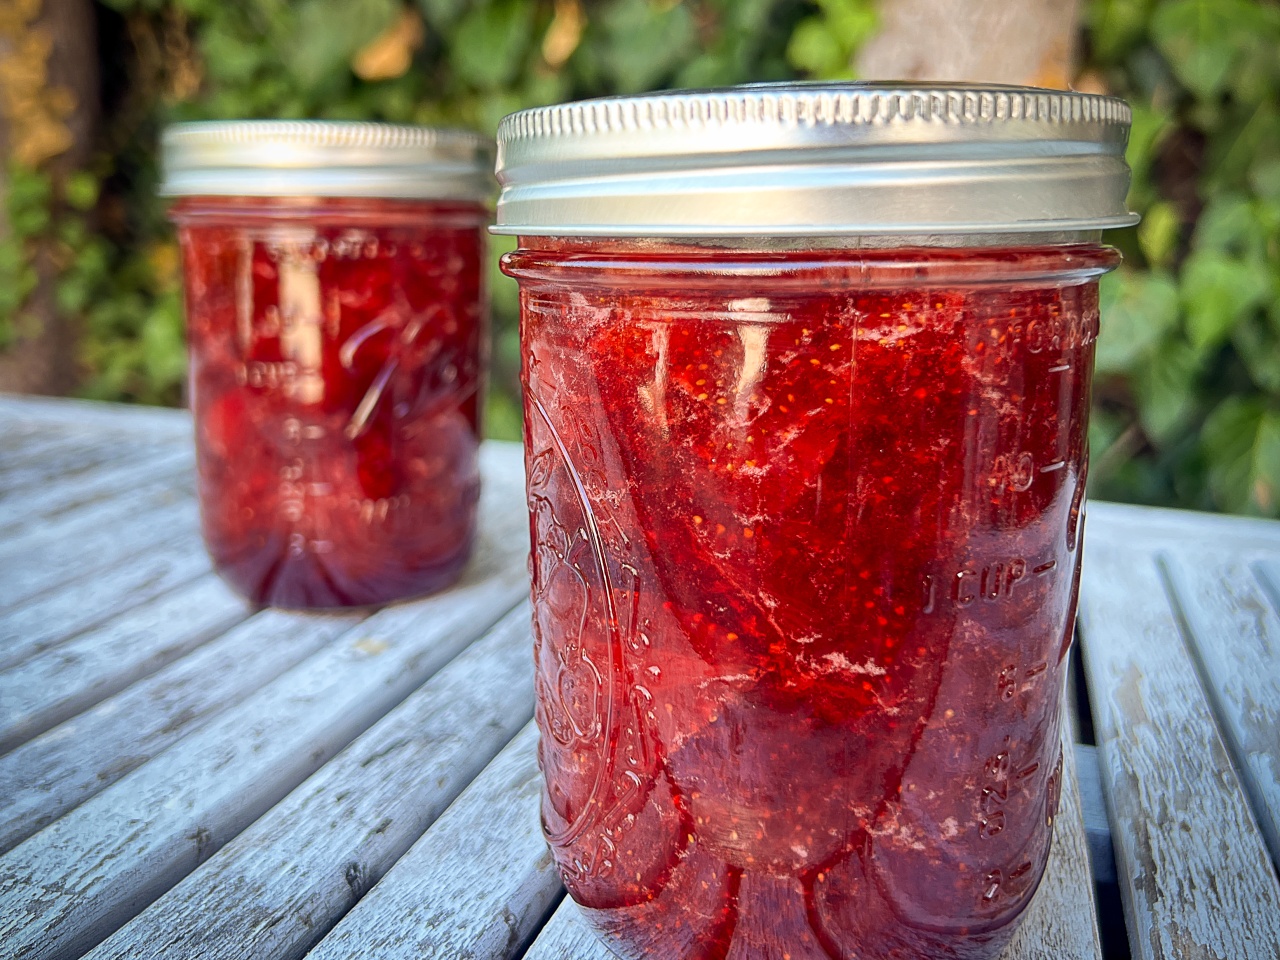 Strawberry Jam recipe by Bad Manners